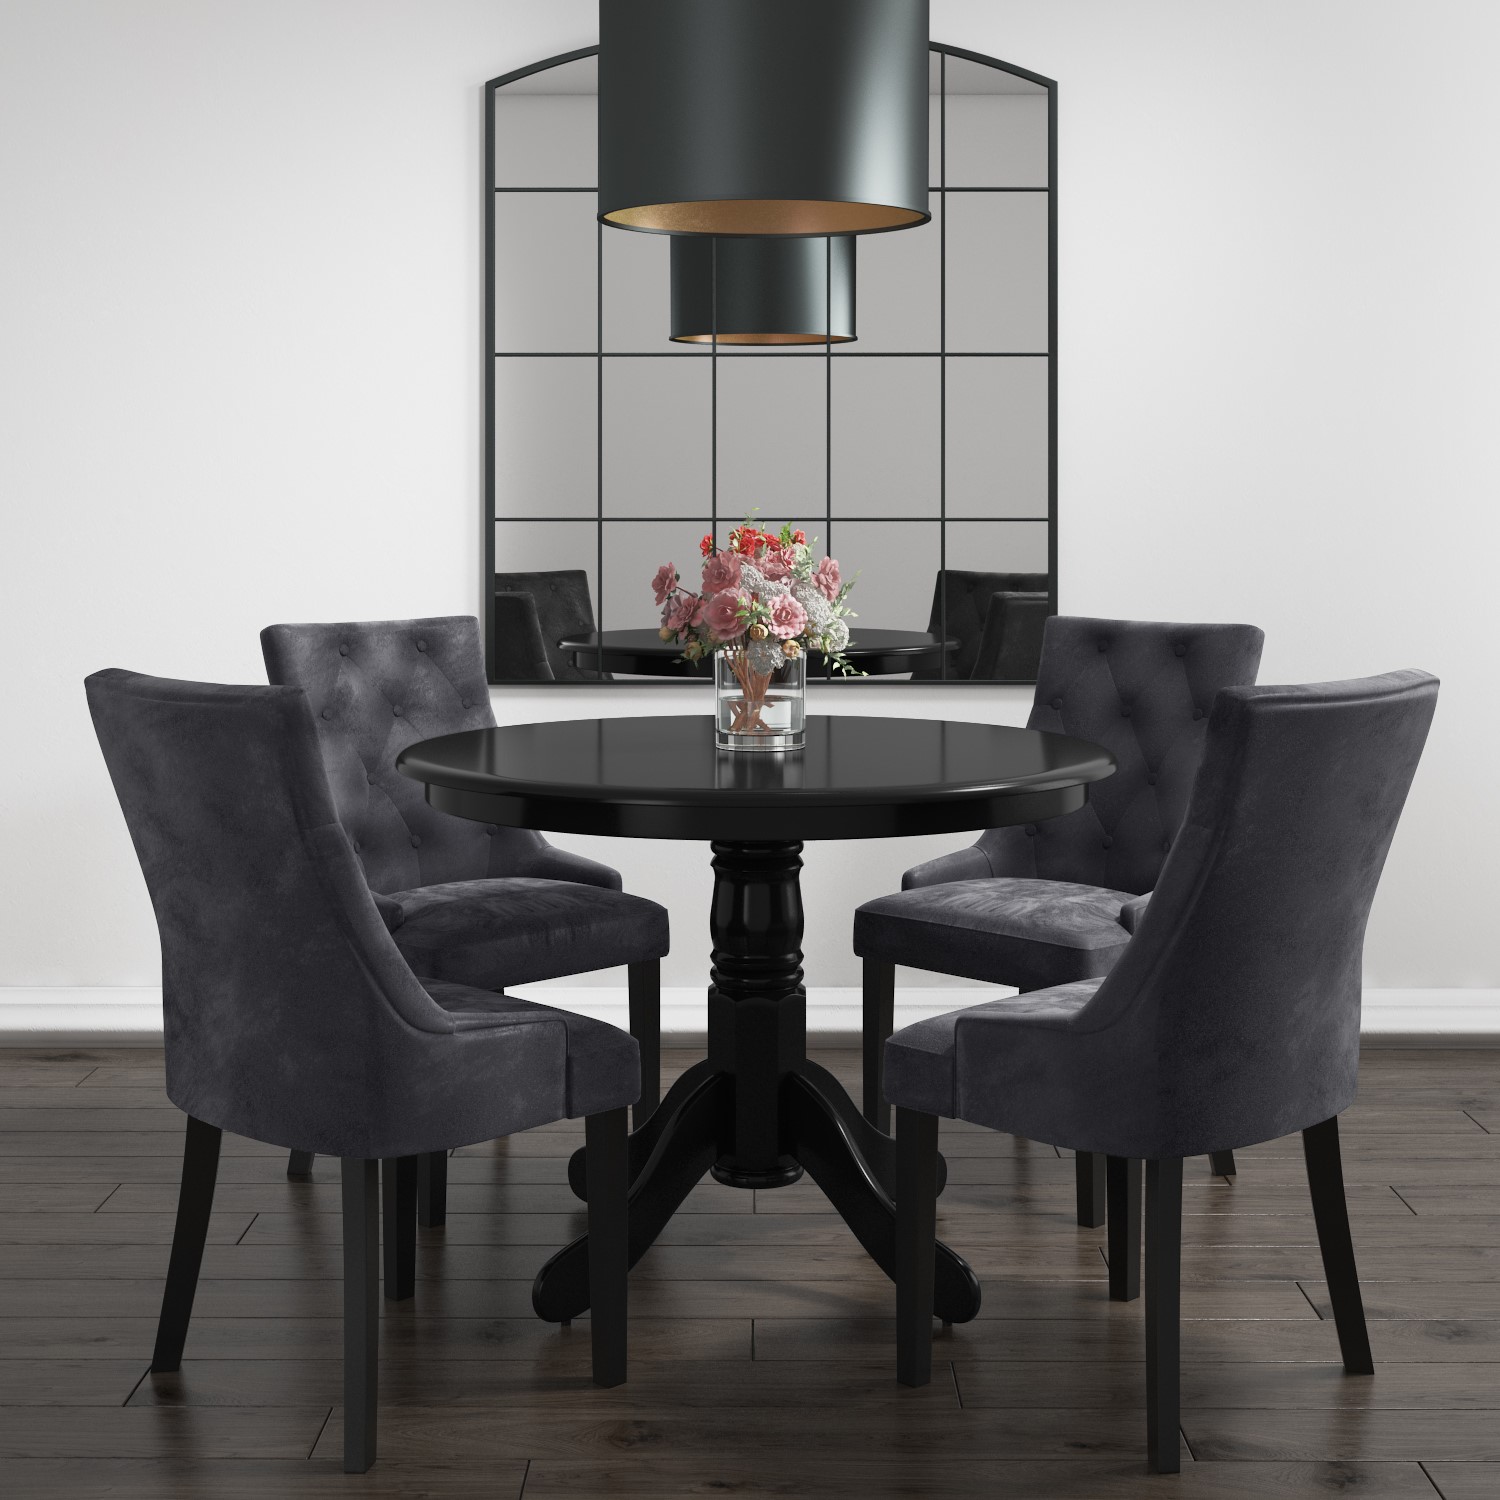 Small Round Dining Table In Black With, Small Round Black Dining Table And Chairs